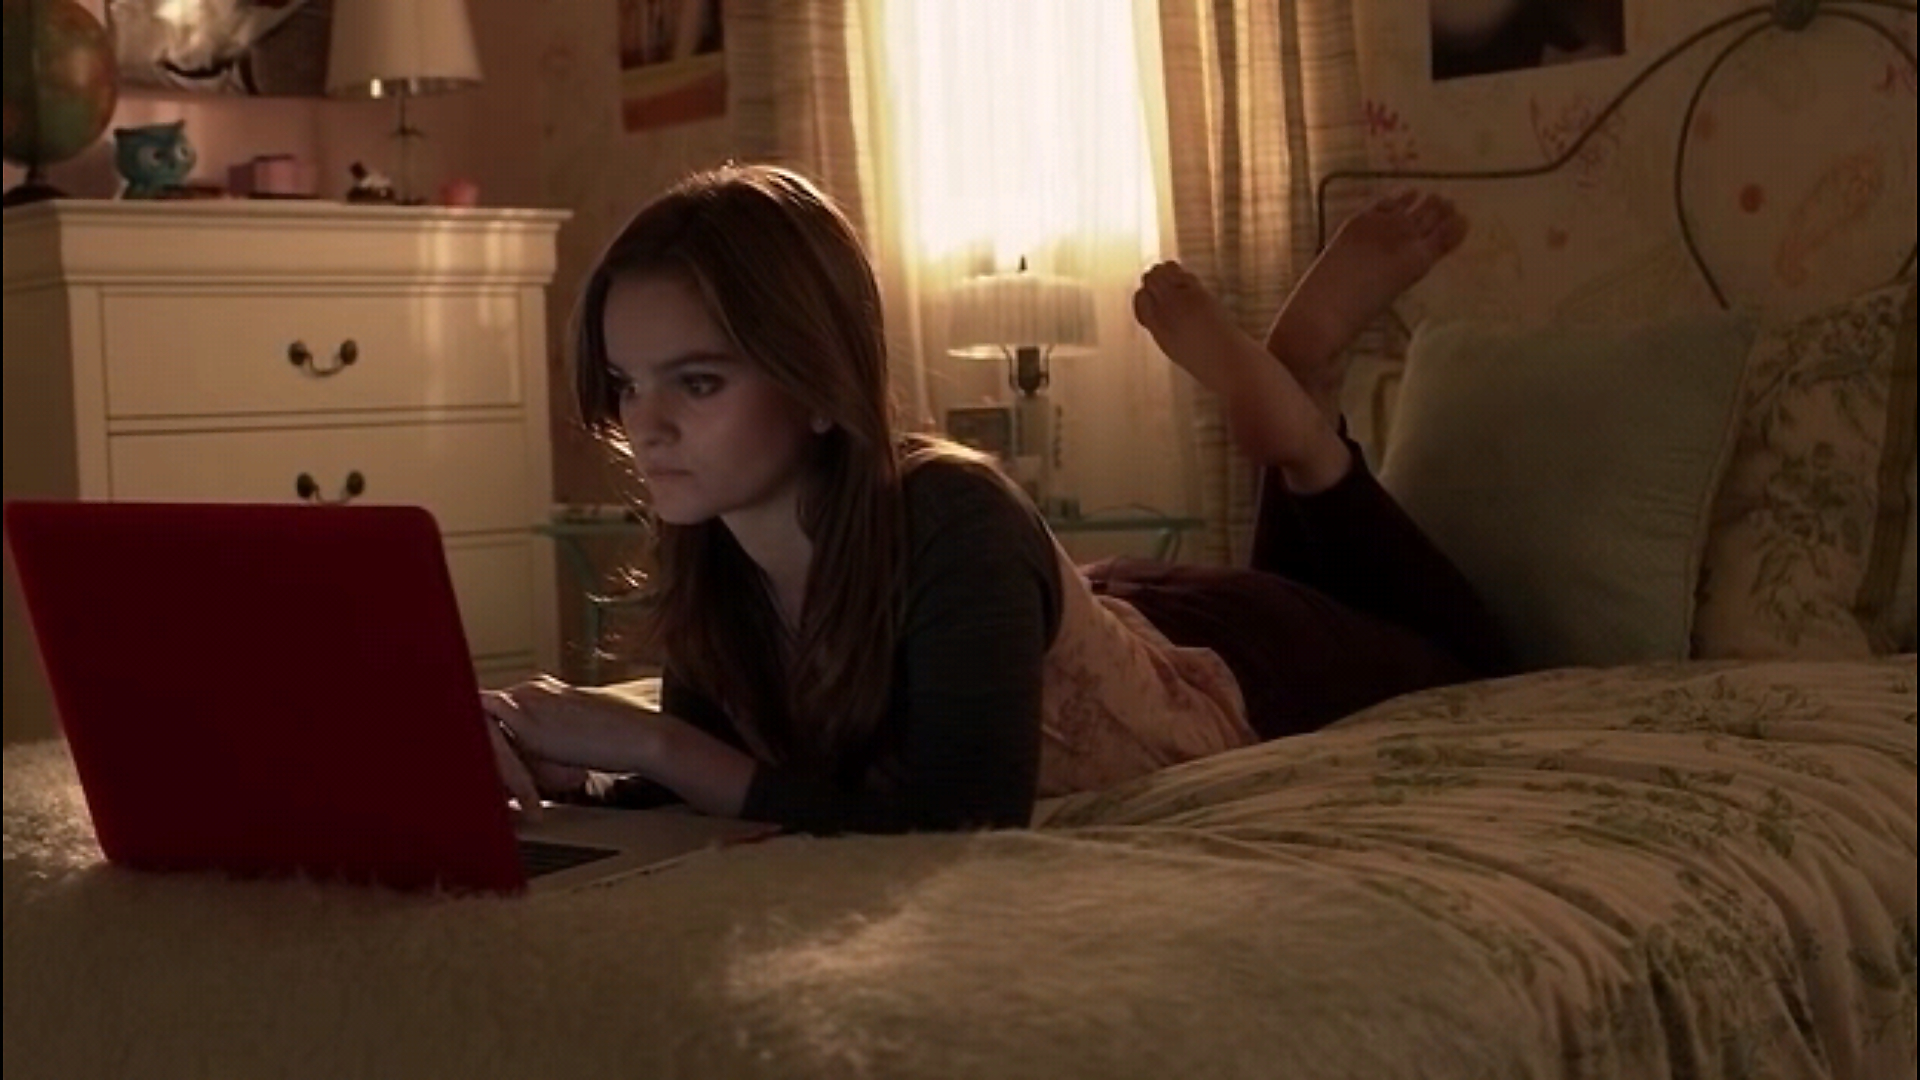 People who liked Kerris Dorsey's feet, also liked.